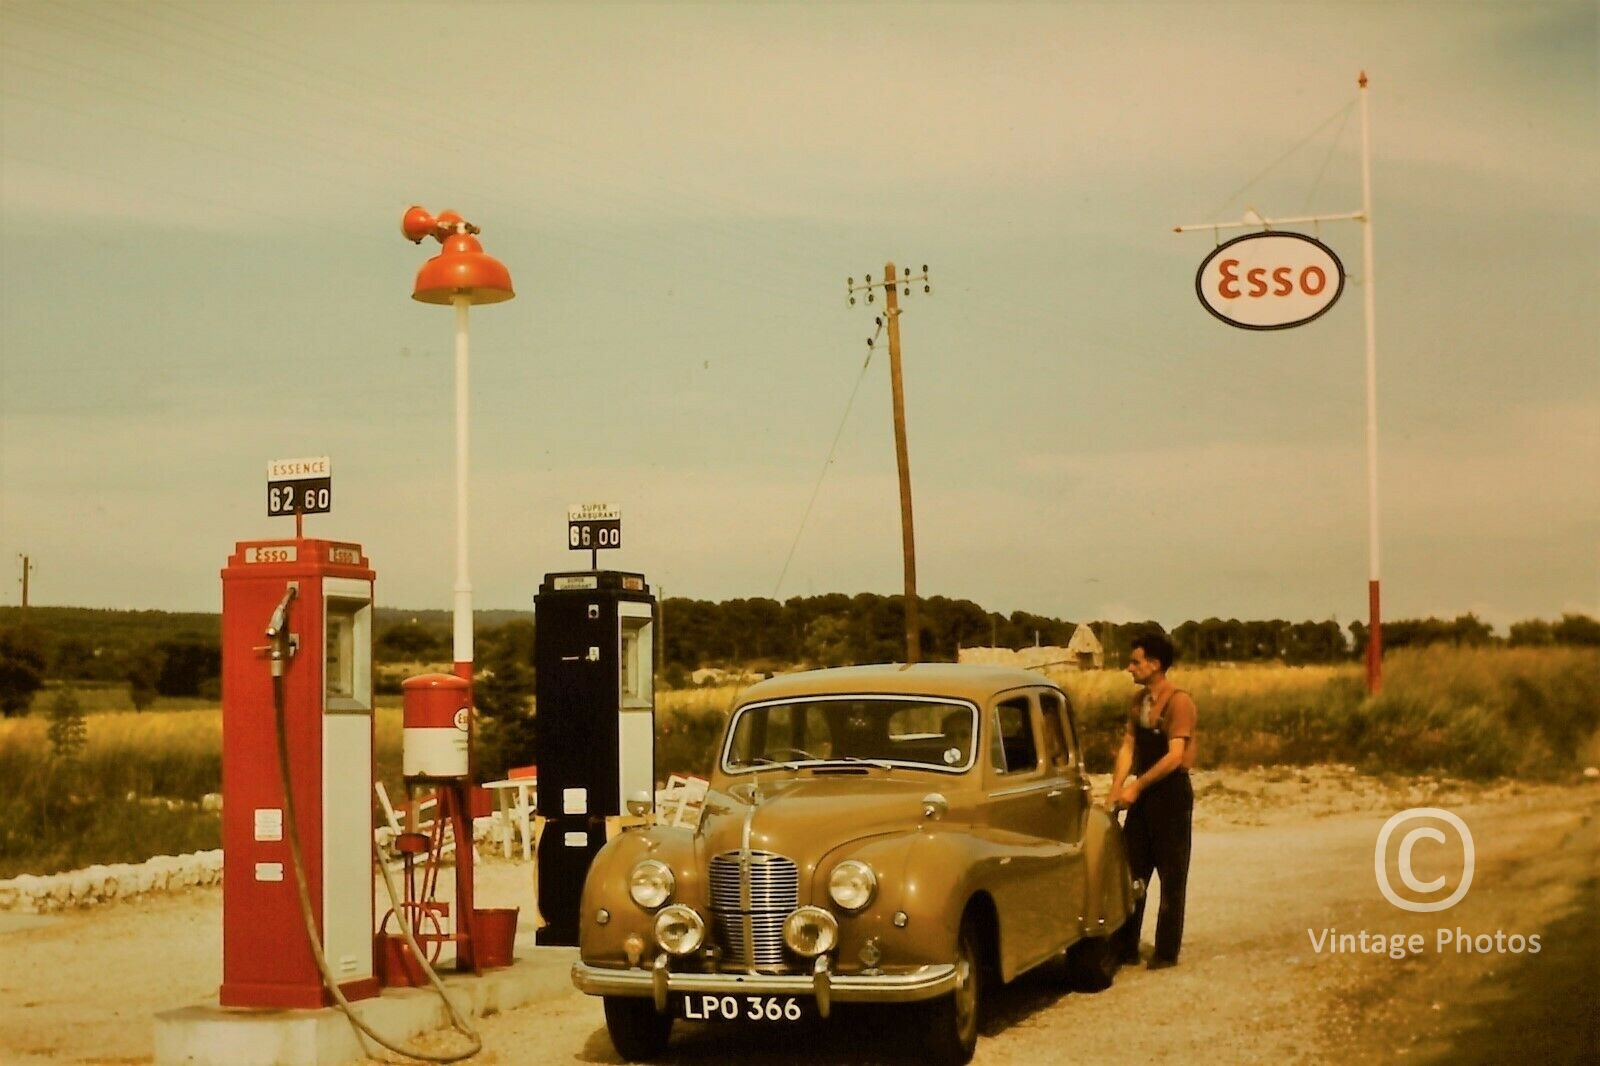 1950s Classic Austin A70 Hampshire Countryman at Esso Filling Station